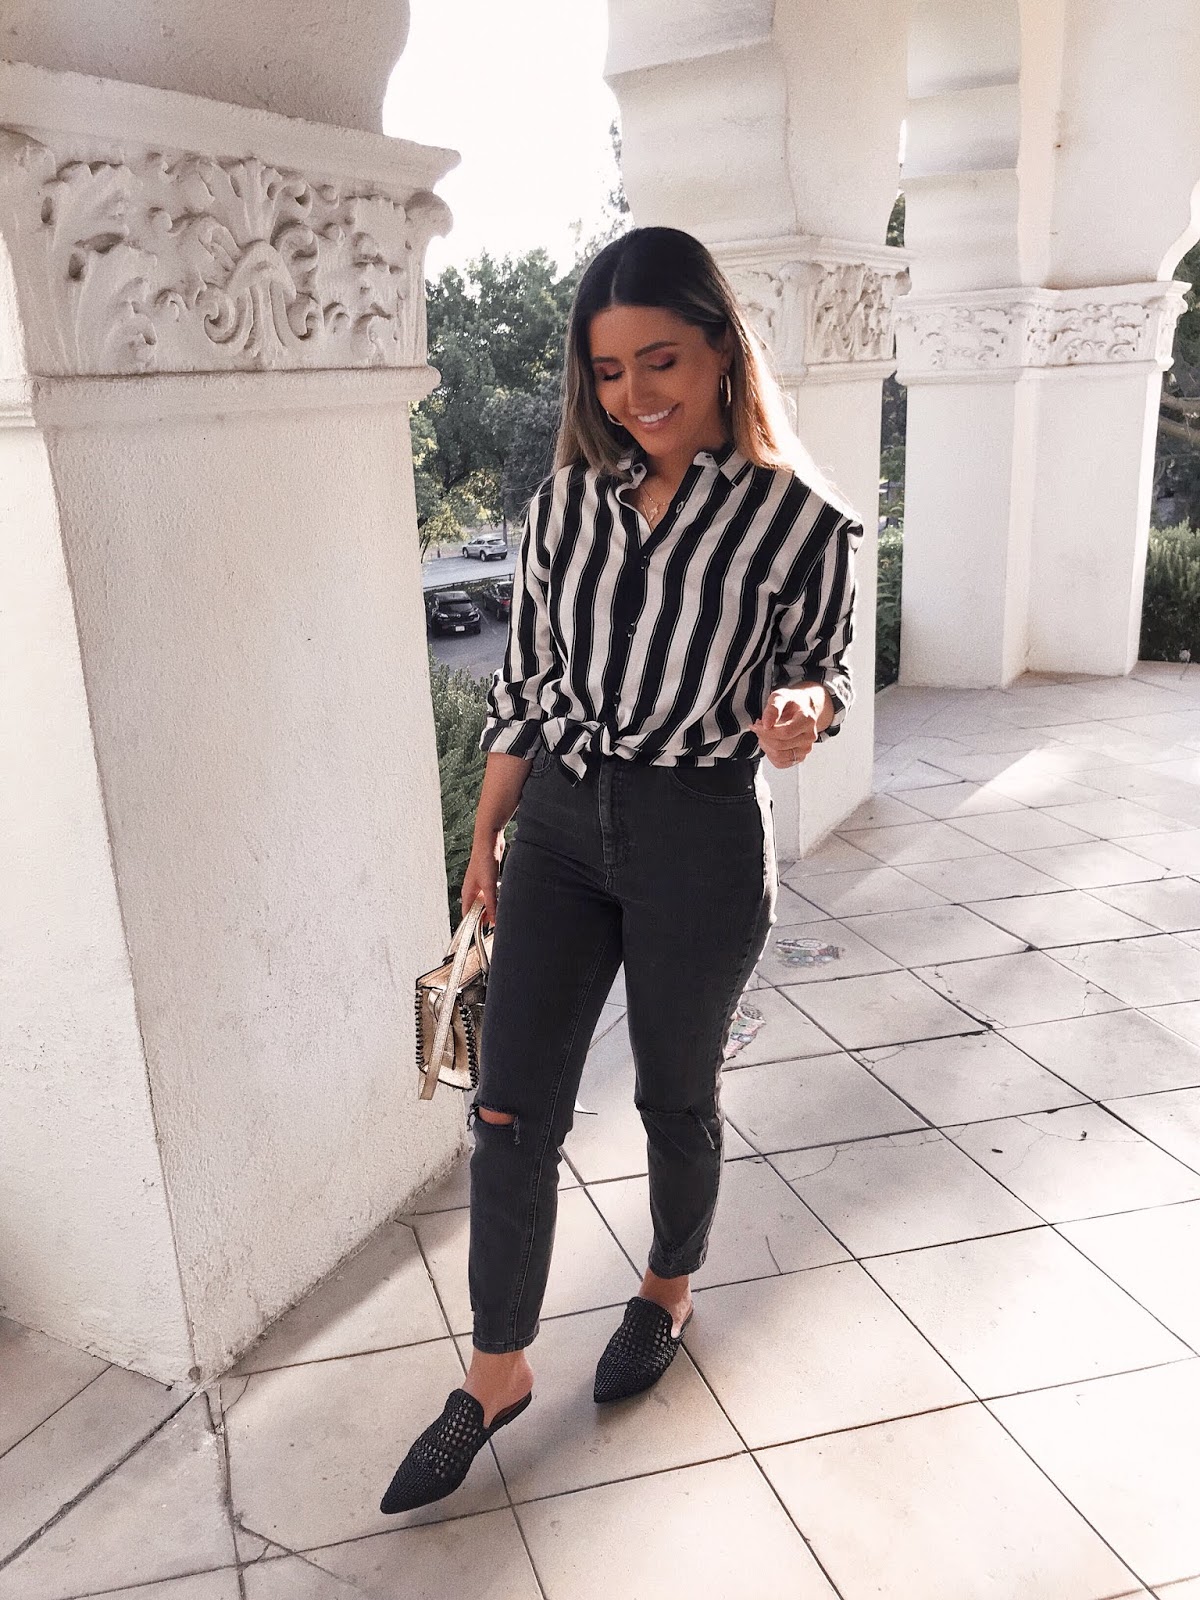 how to style button down shirt, Parmida Kiani, how to style, fashion tips, fall fashion 2018, stripe button down, asos men's shirt, styling my boyfriends shirt, wearing husband's shirt, tied button down, asos farleigh jeans, affordable fashion, Persian blogger, LA blogger, Pinterest outfit, ootd, outfit Inspo, what to wear, Los Angeles, 